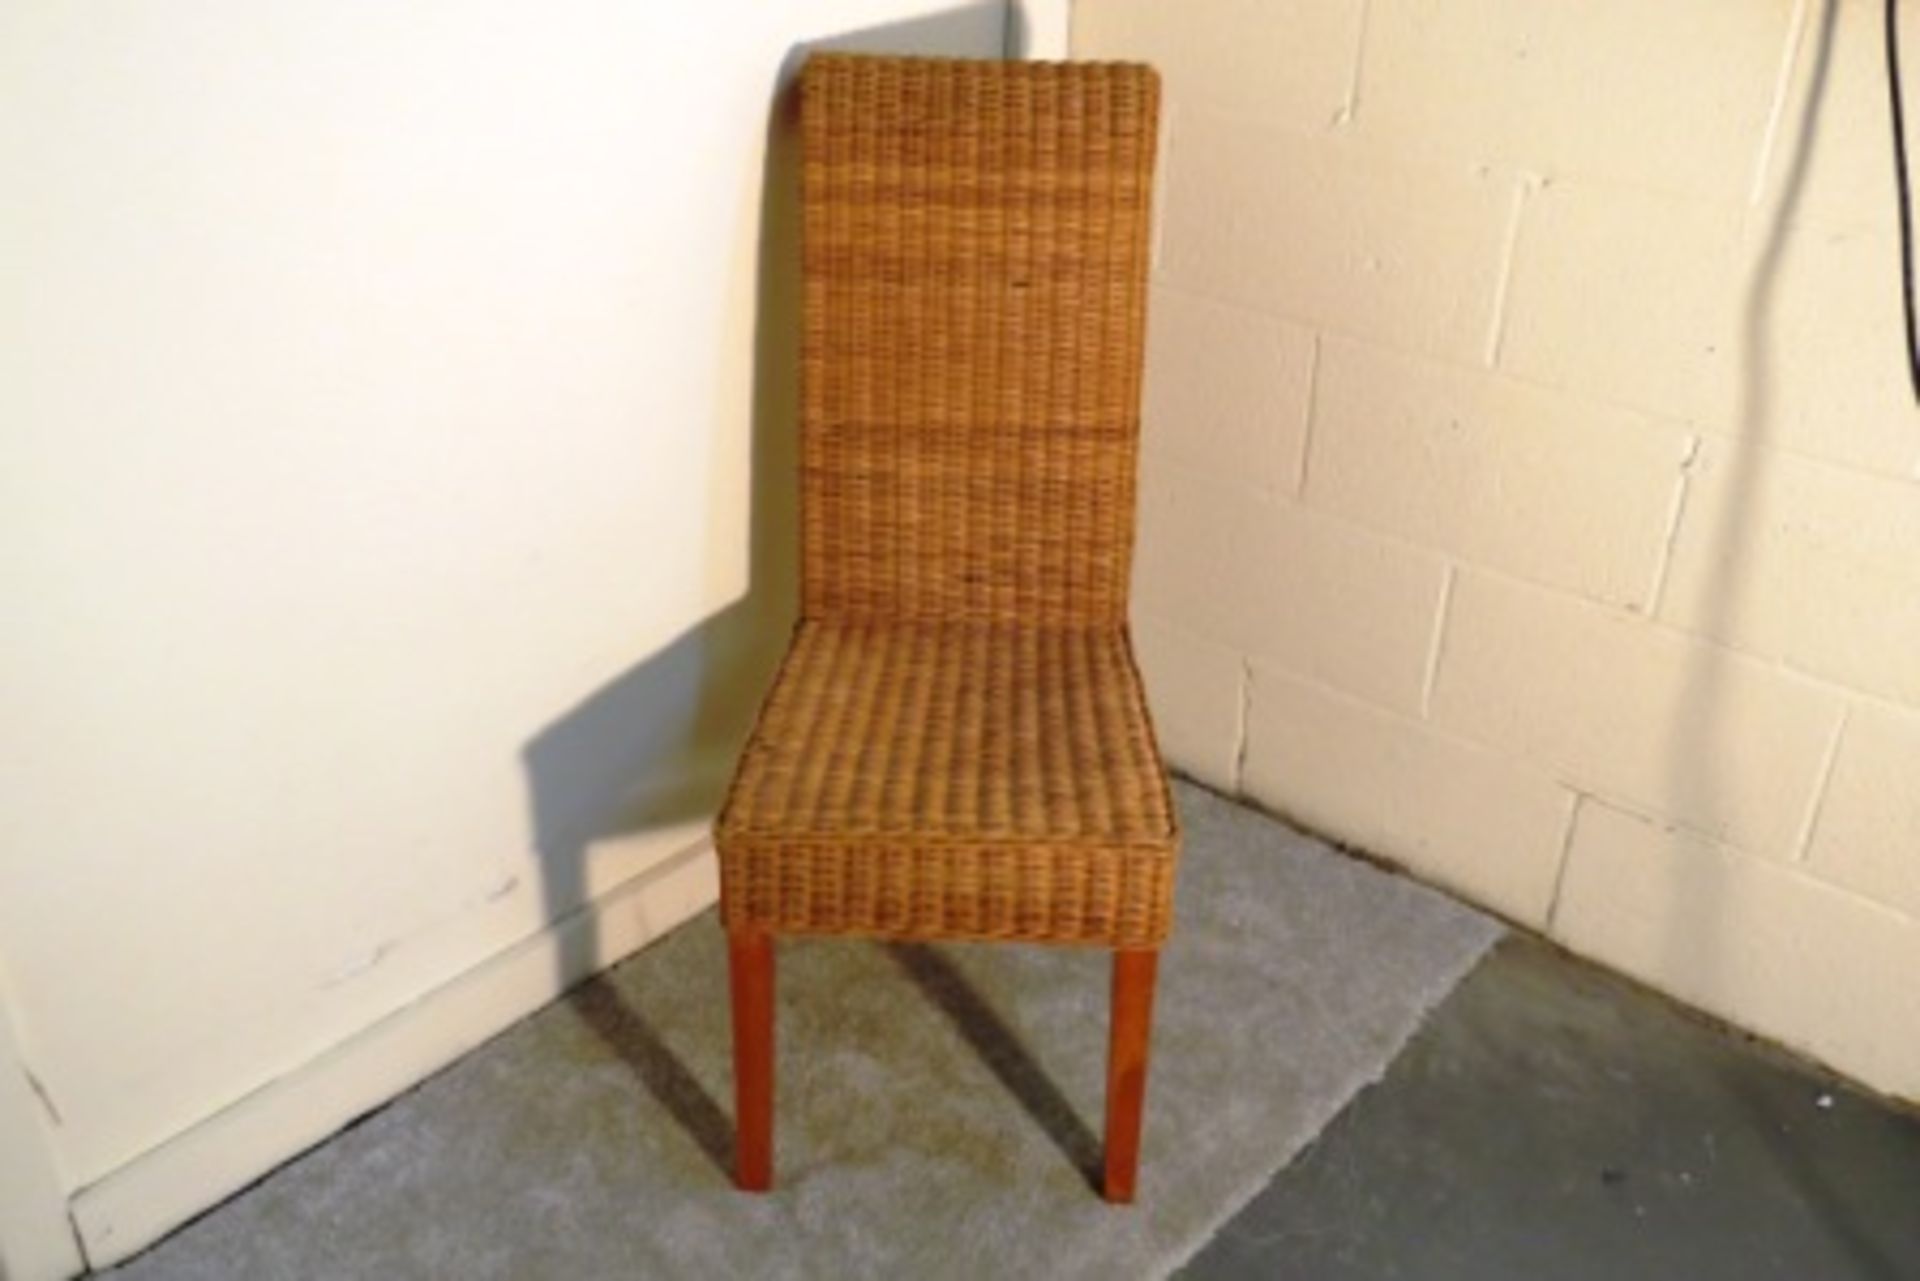 HIGH BACK RATTAN DINING CHAIR - Image 2 of 2